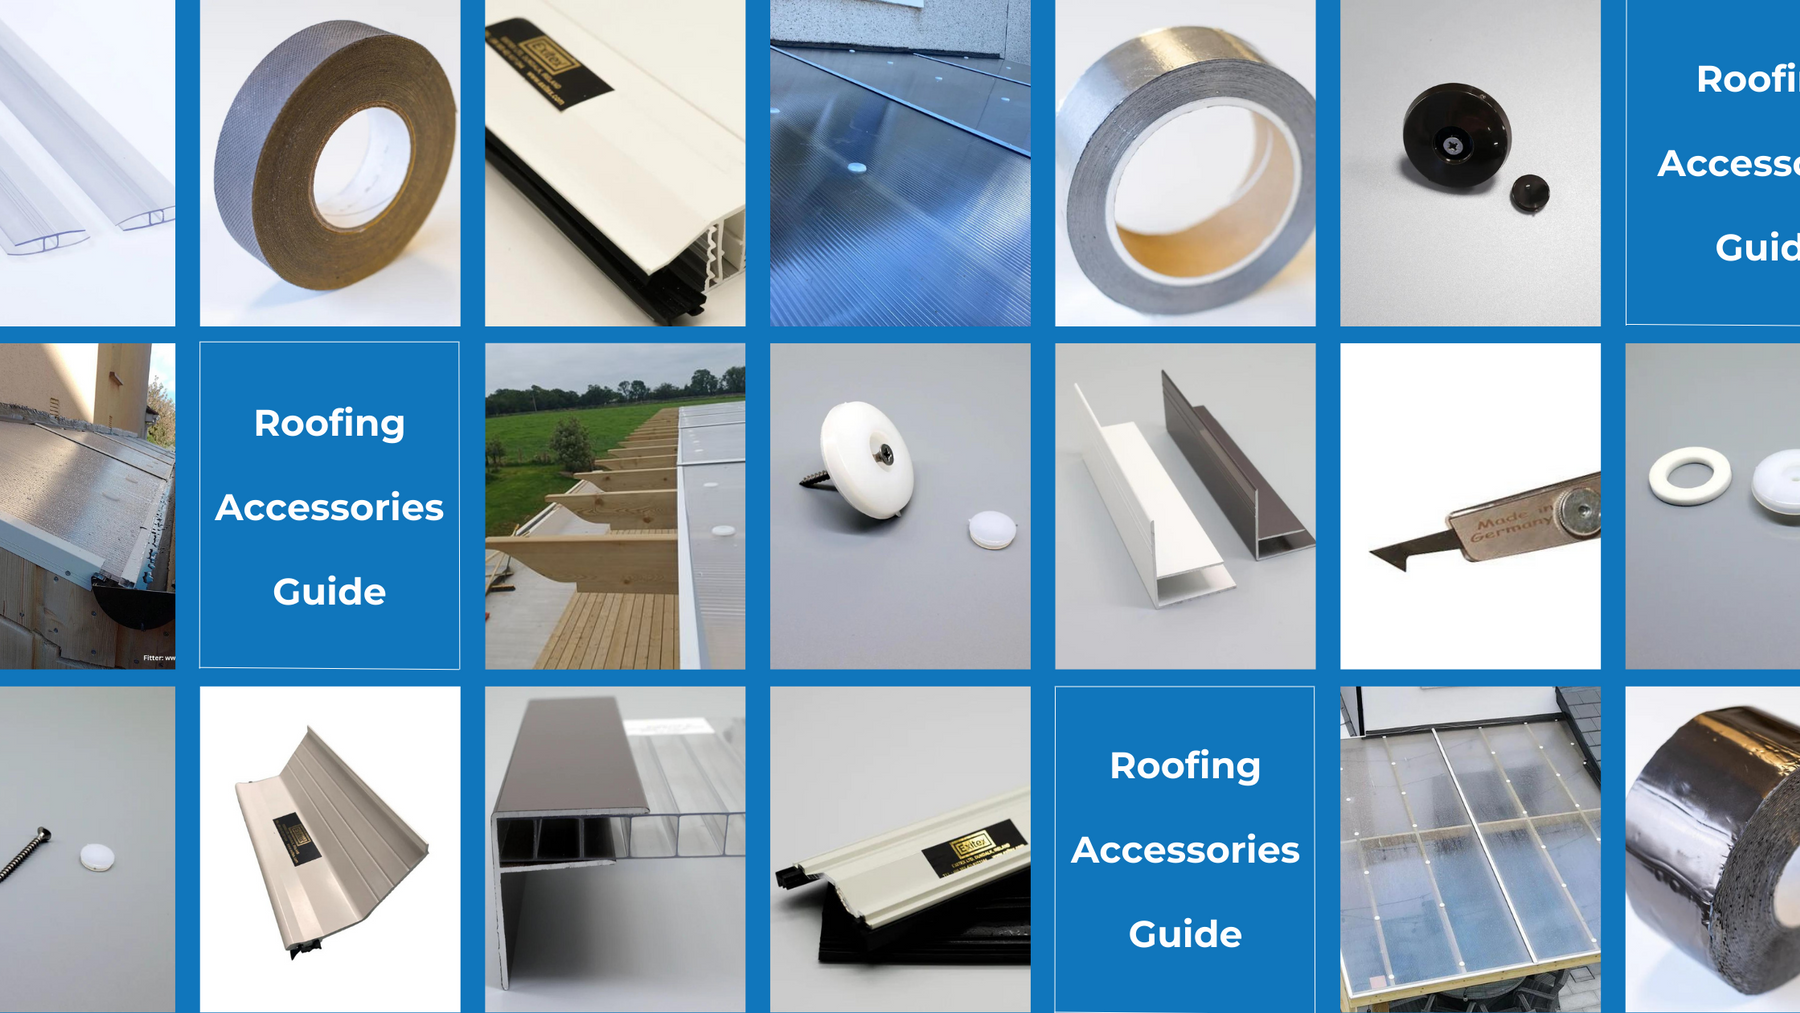 Roofing Accessories Guide